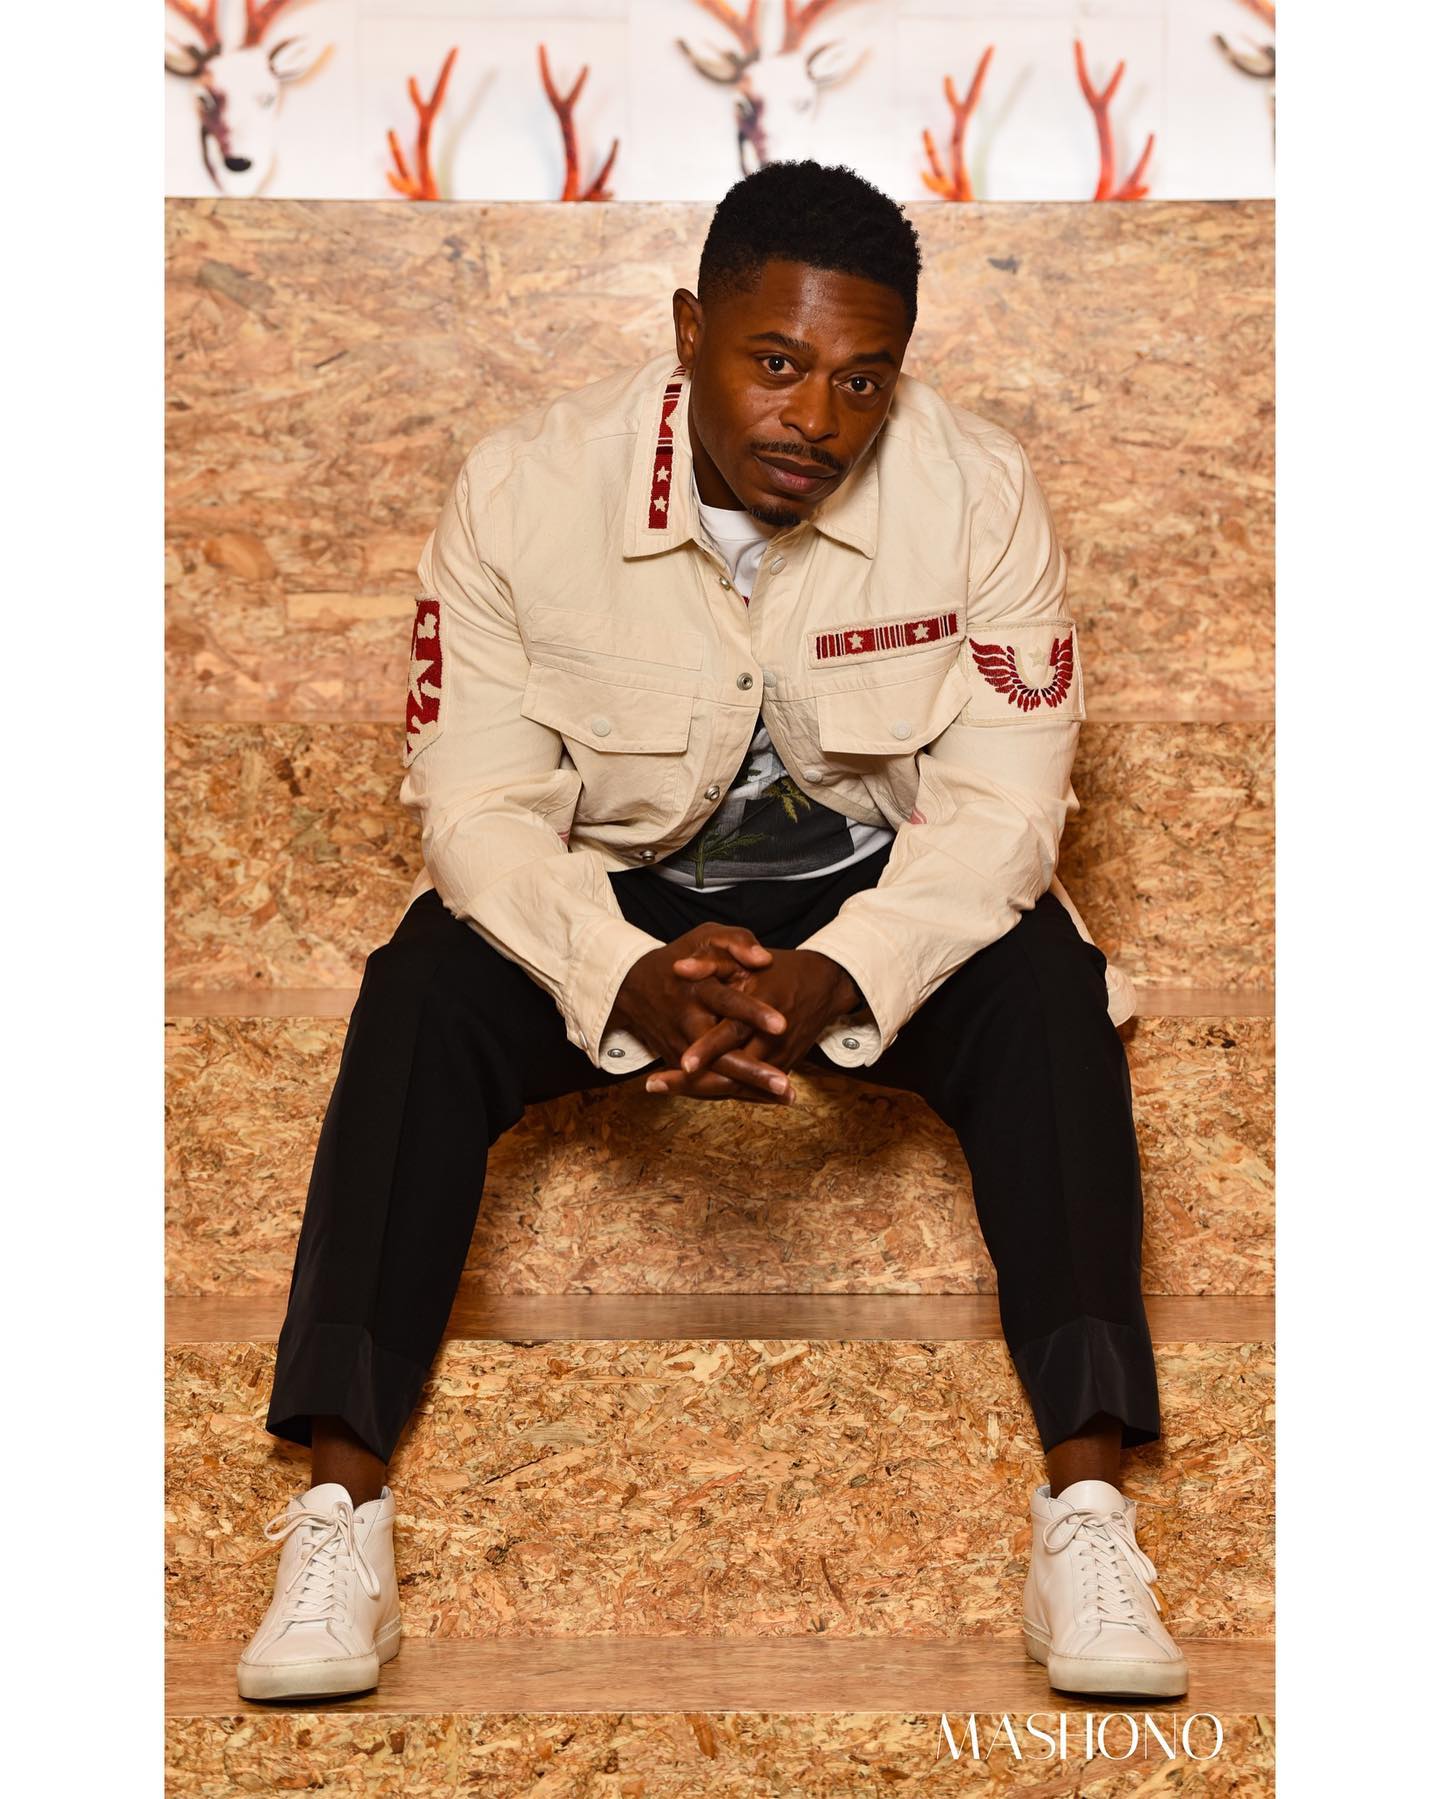 One Of Them Ones! #kareemgrimes for Mashono Magazine in #Valentino Jacket #ferragamo Pants @commonprojects sneakers! Thank You Kareem for the vibes and genuine energy! #salute Mashono Magazine June/July Issue is available now! Link in Bio!